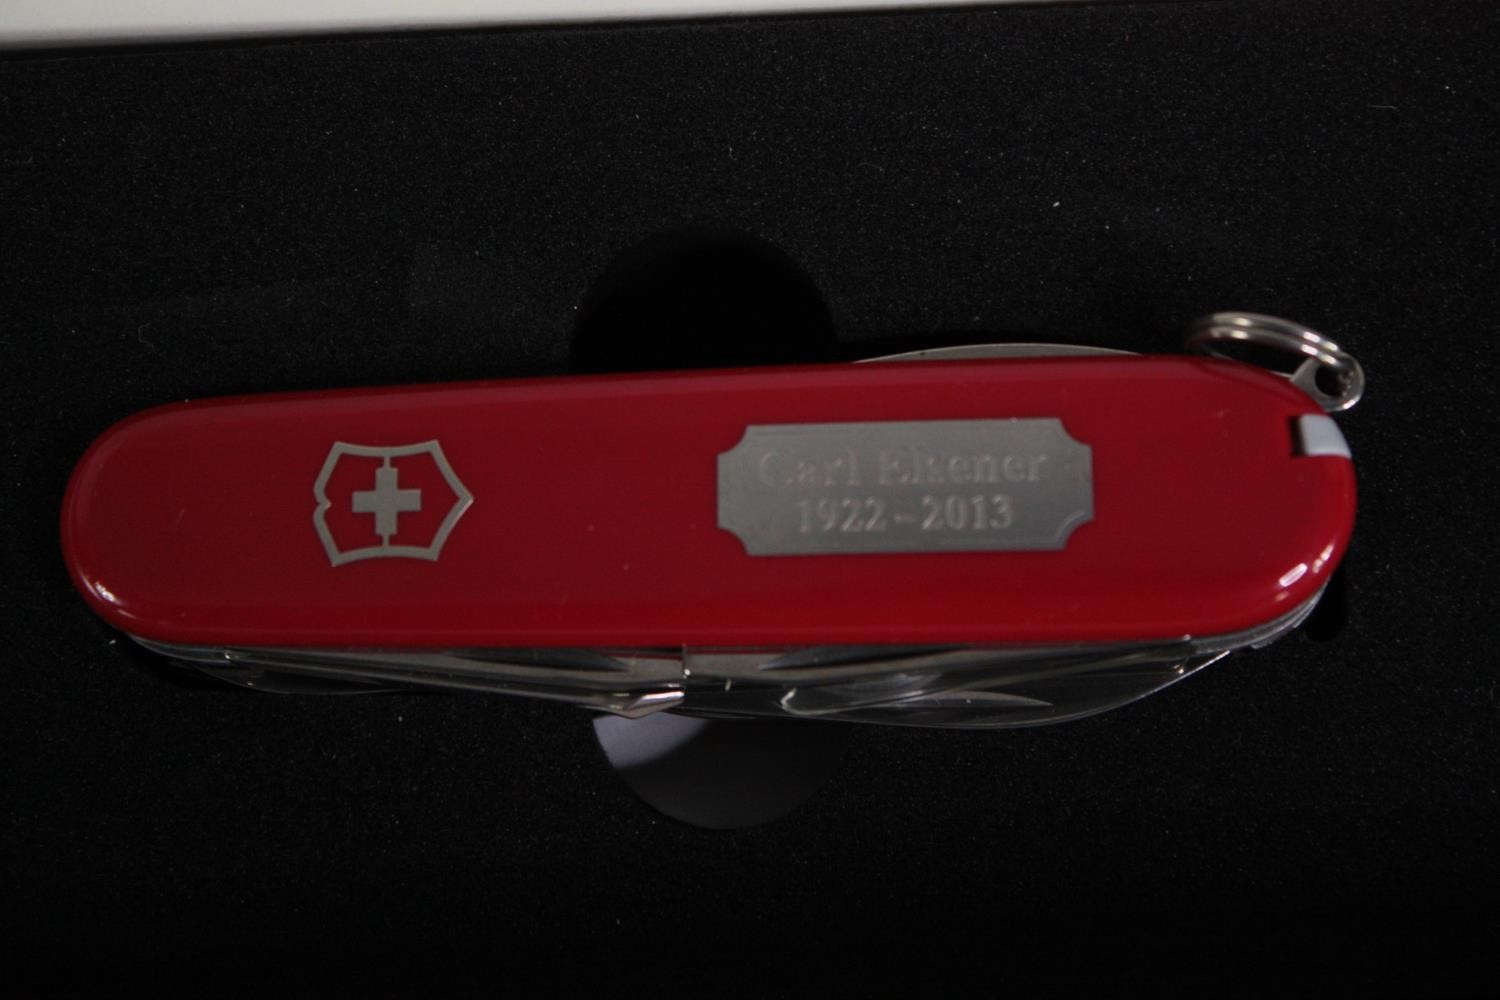 Victorinox shop display model. Swiss army Knife with opening and retracting attachments. In full - Image 7 of 7